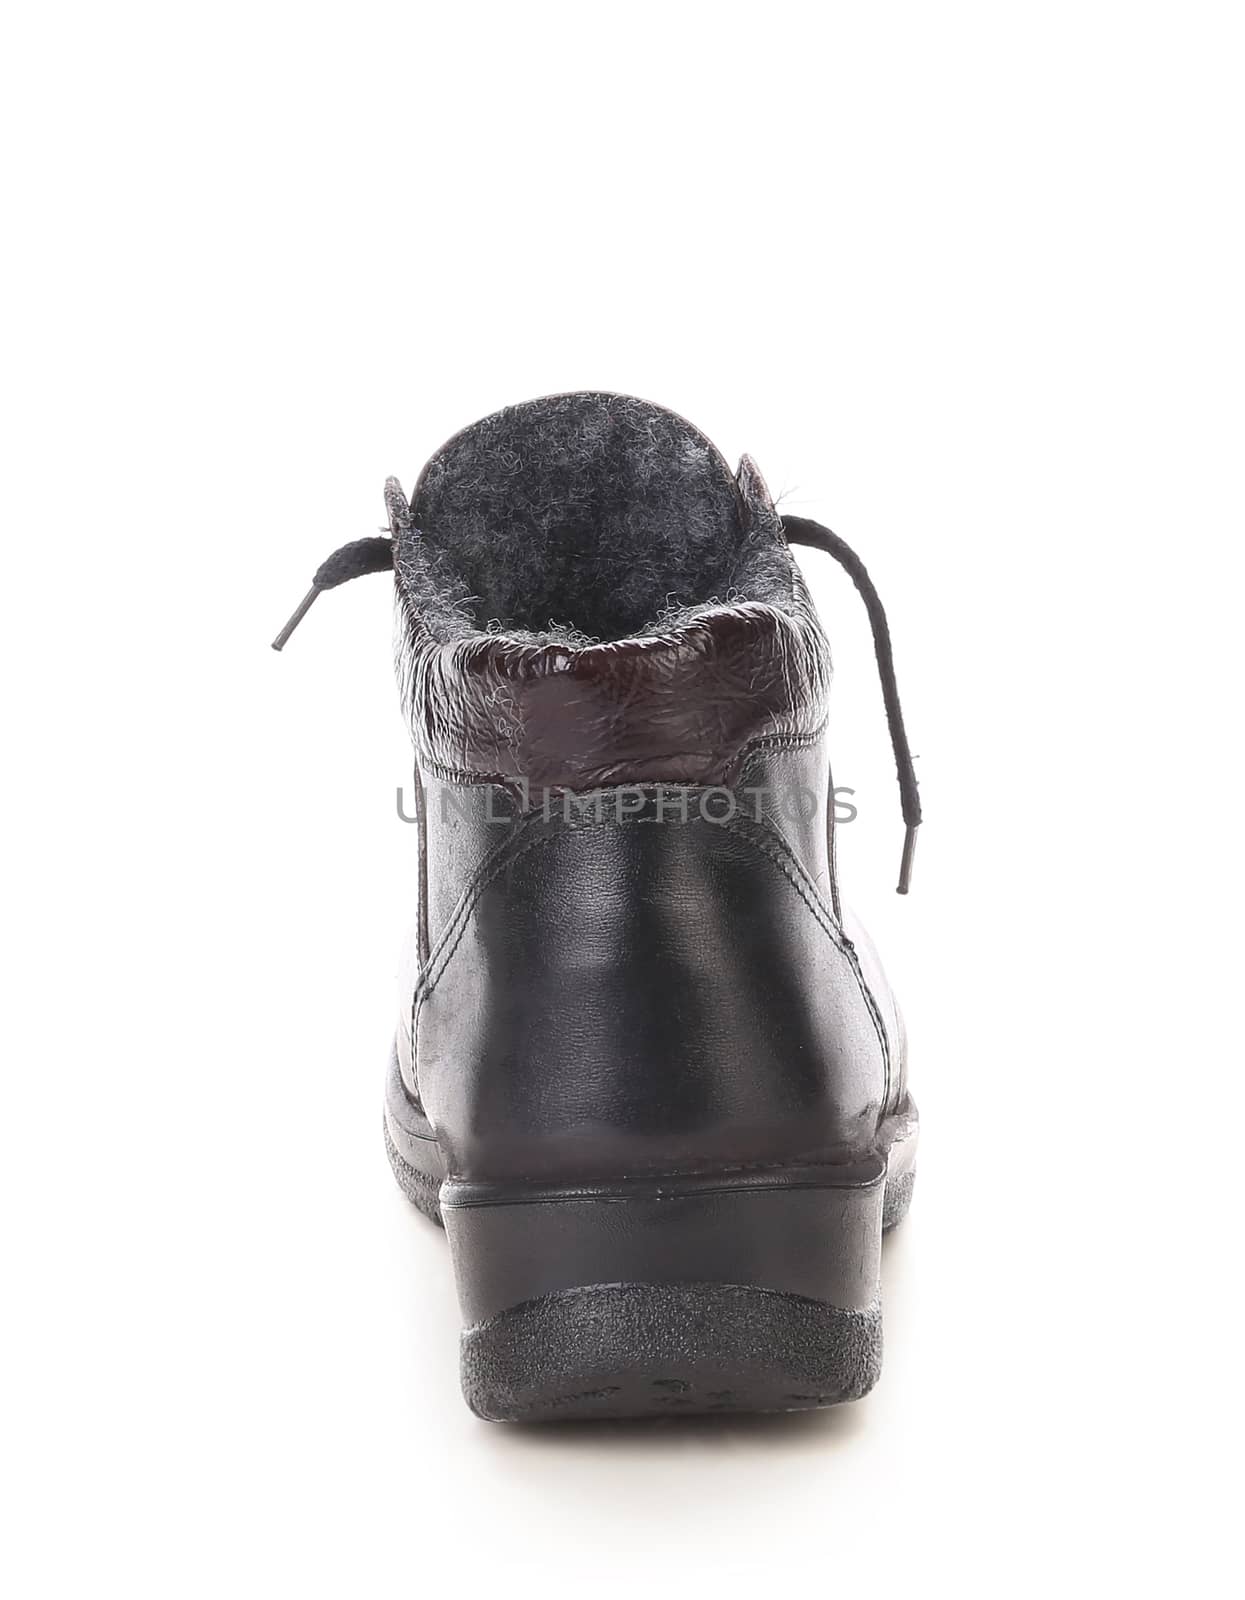 Back side of leather boot. Isolated on a white background.